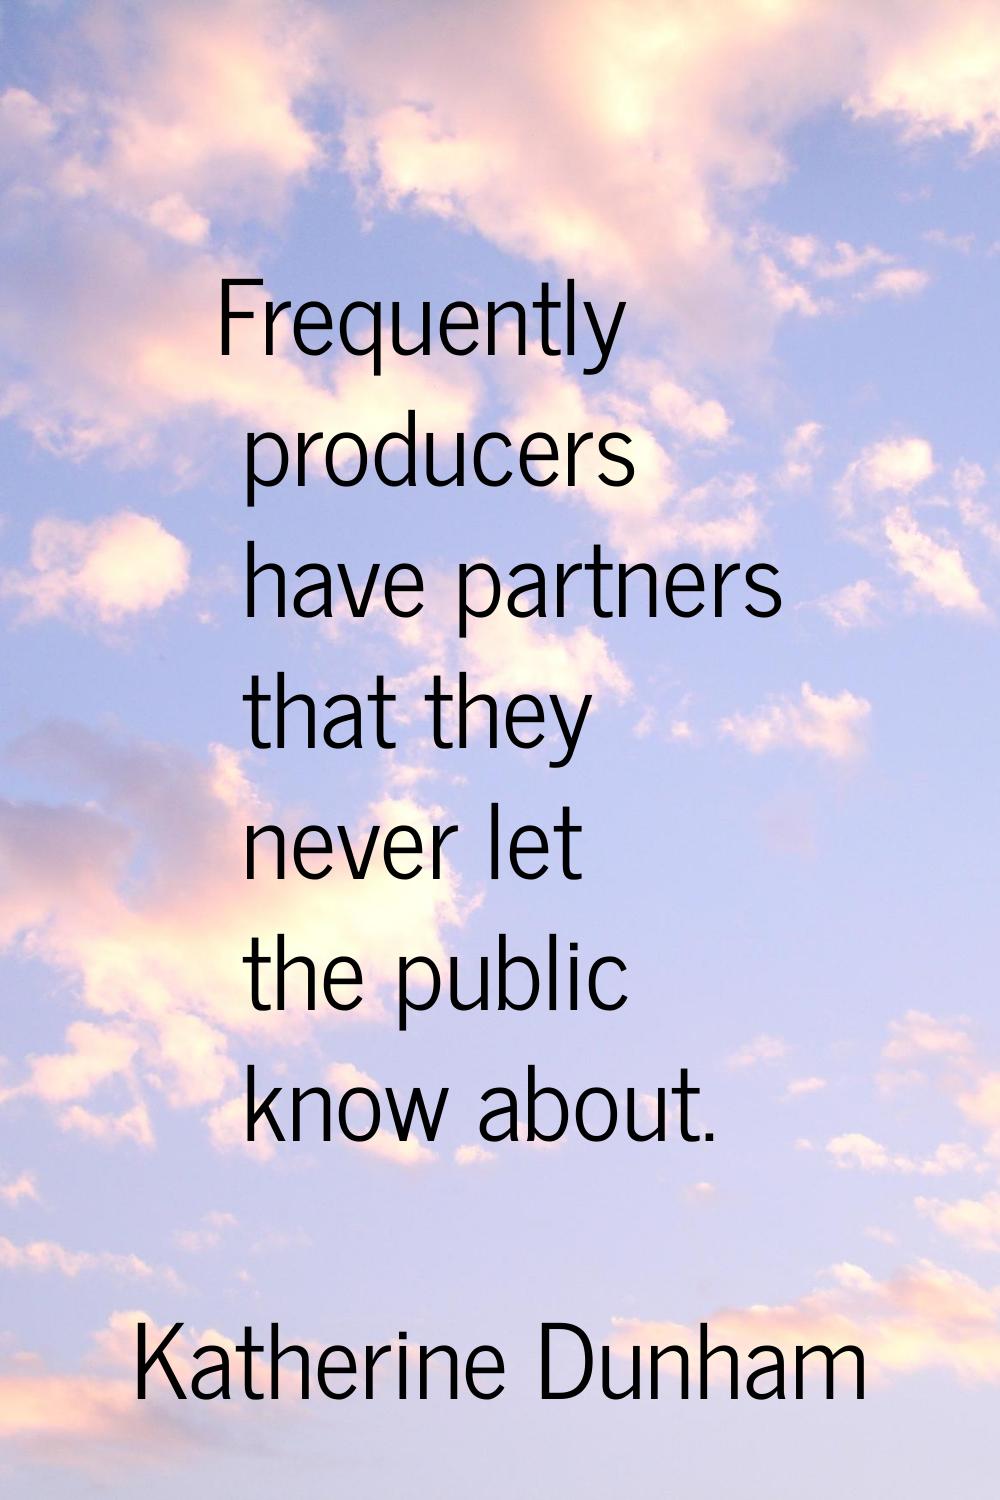 Frequently producers have partners that they never let the public know about.